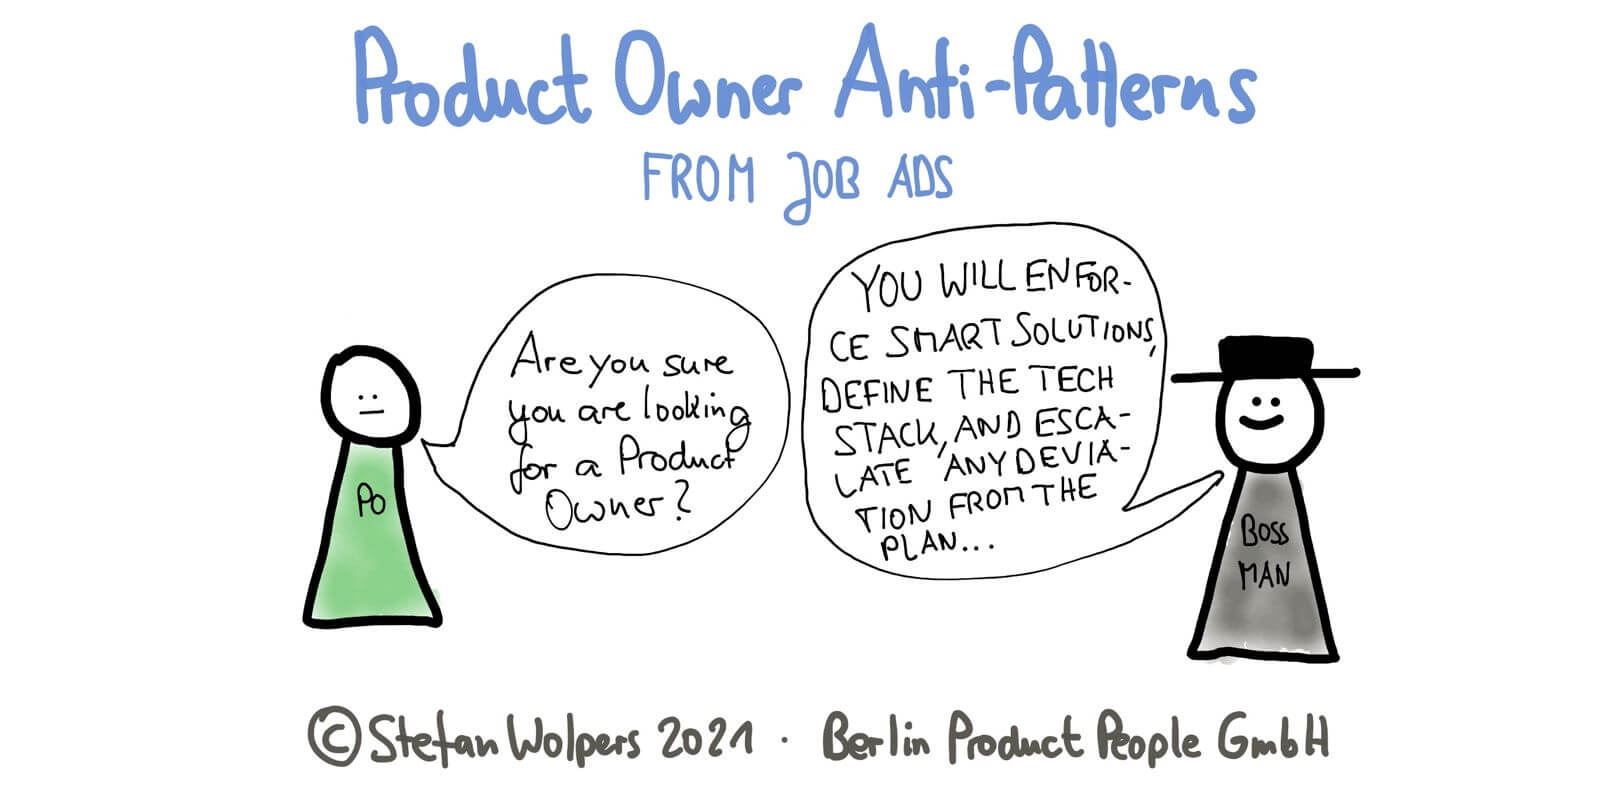 23 Product Owner Anti-Patterns from Job Ads: The Snitch, the Whip, the Bookkeeper, the Six Sigma Black Belt and #x2122; — Age-of-Product.com